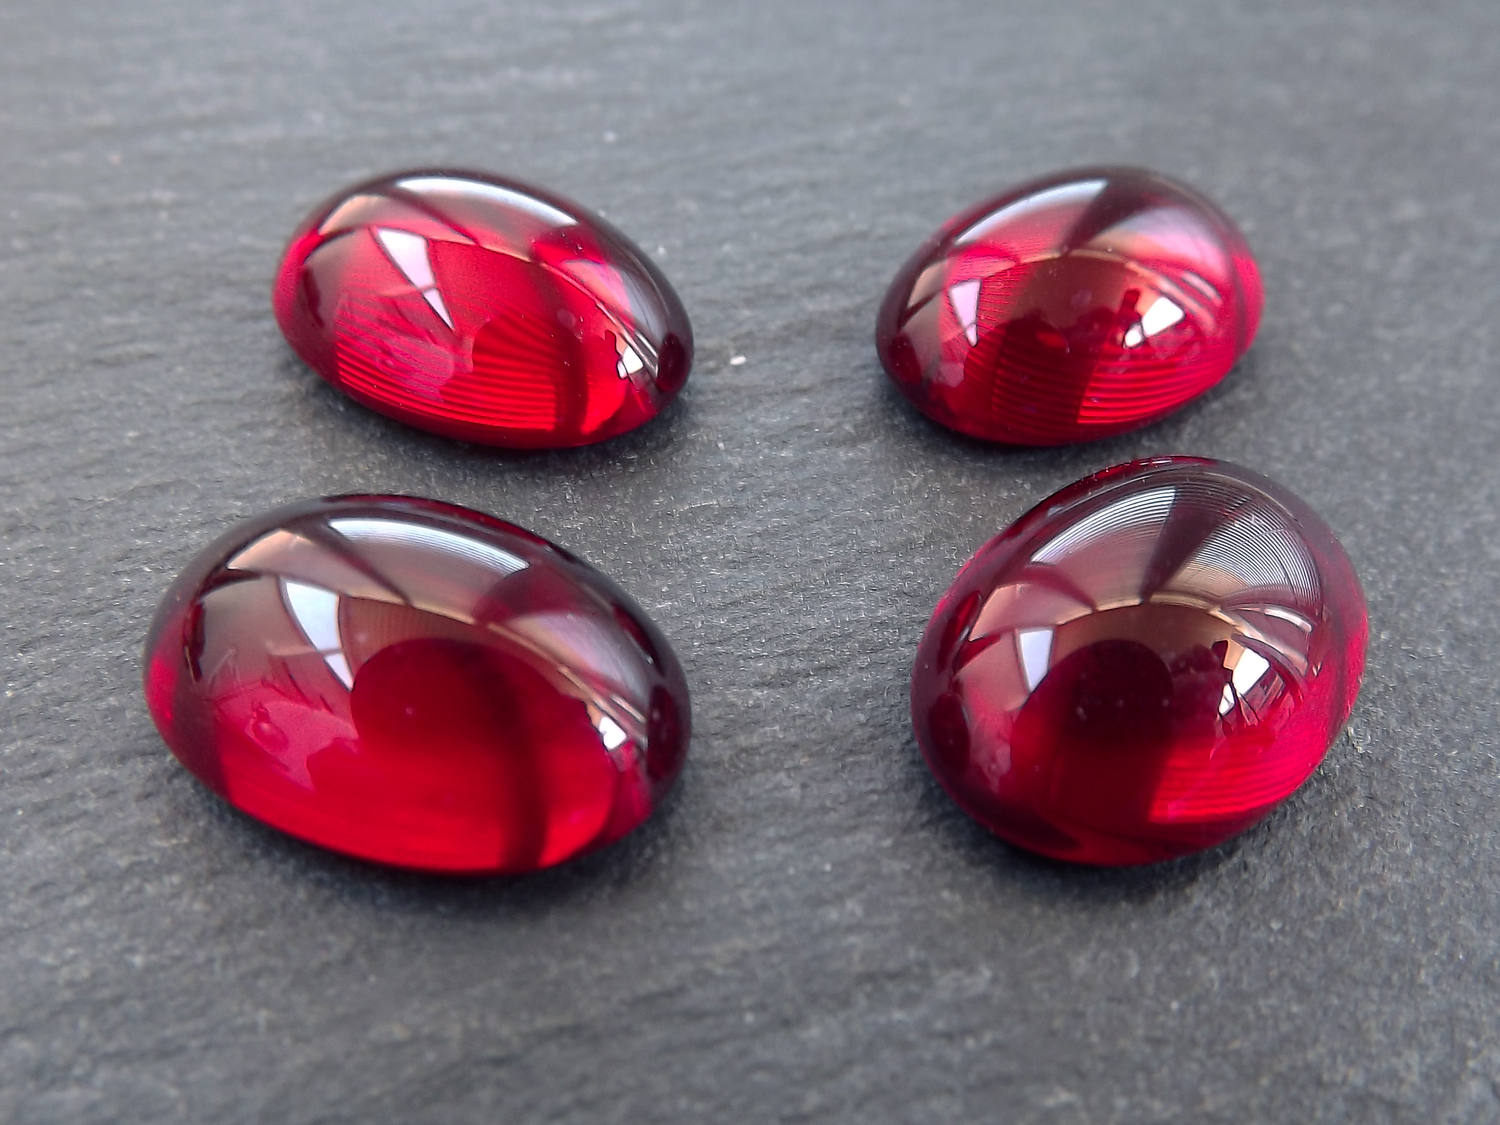 4pcs Red Czech Oval Glass Dome Cabochon Beads - 18 x 12mm